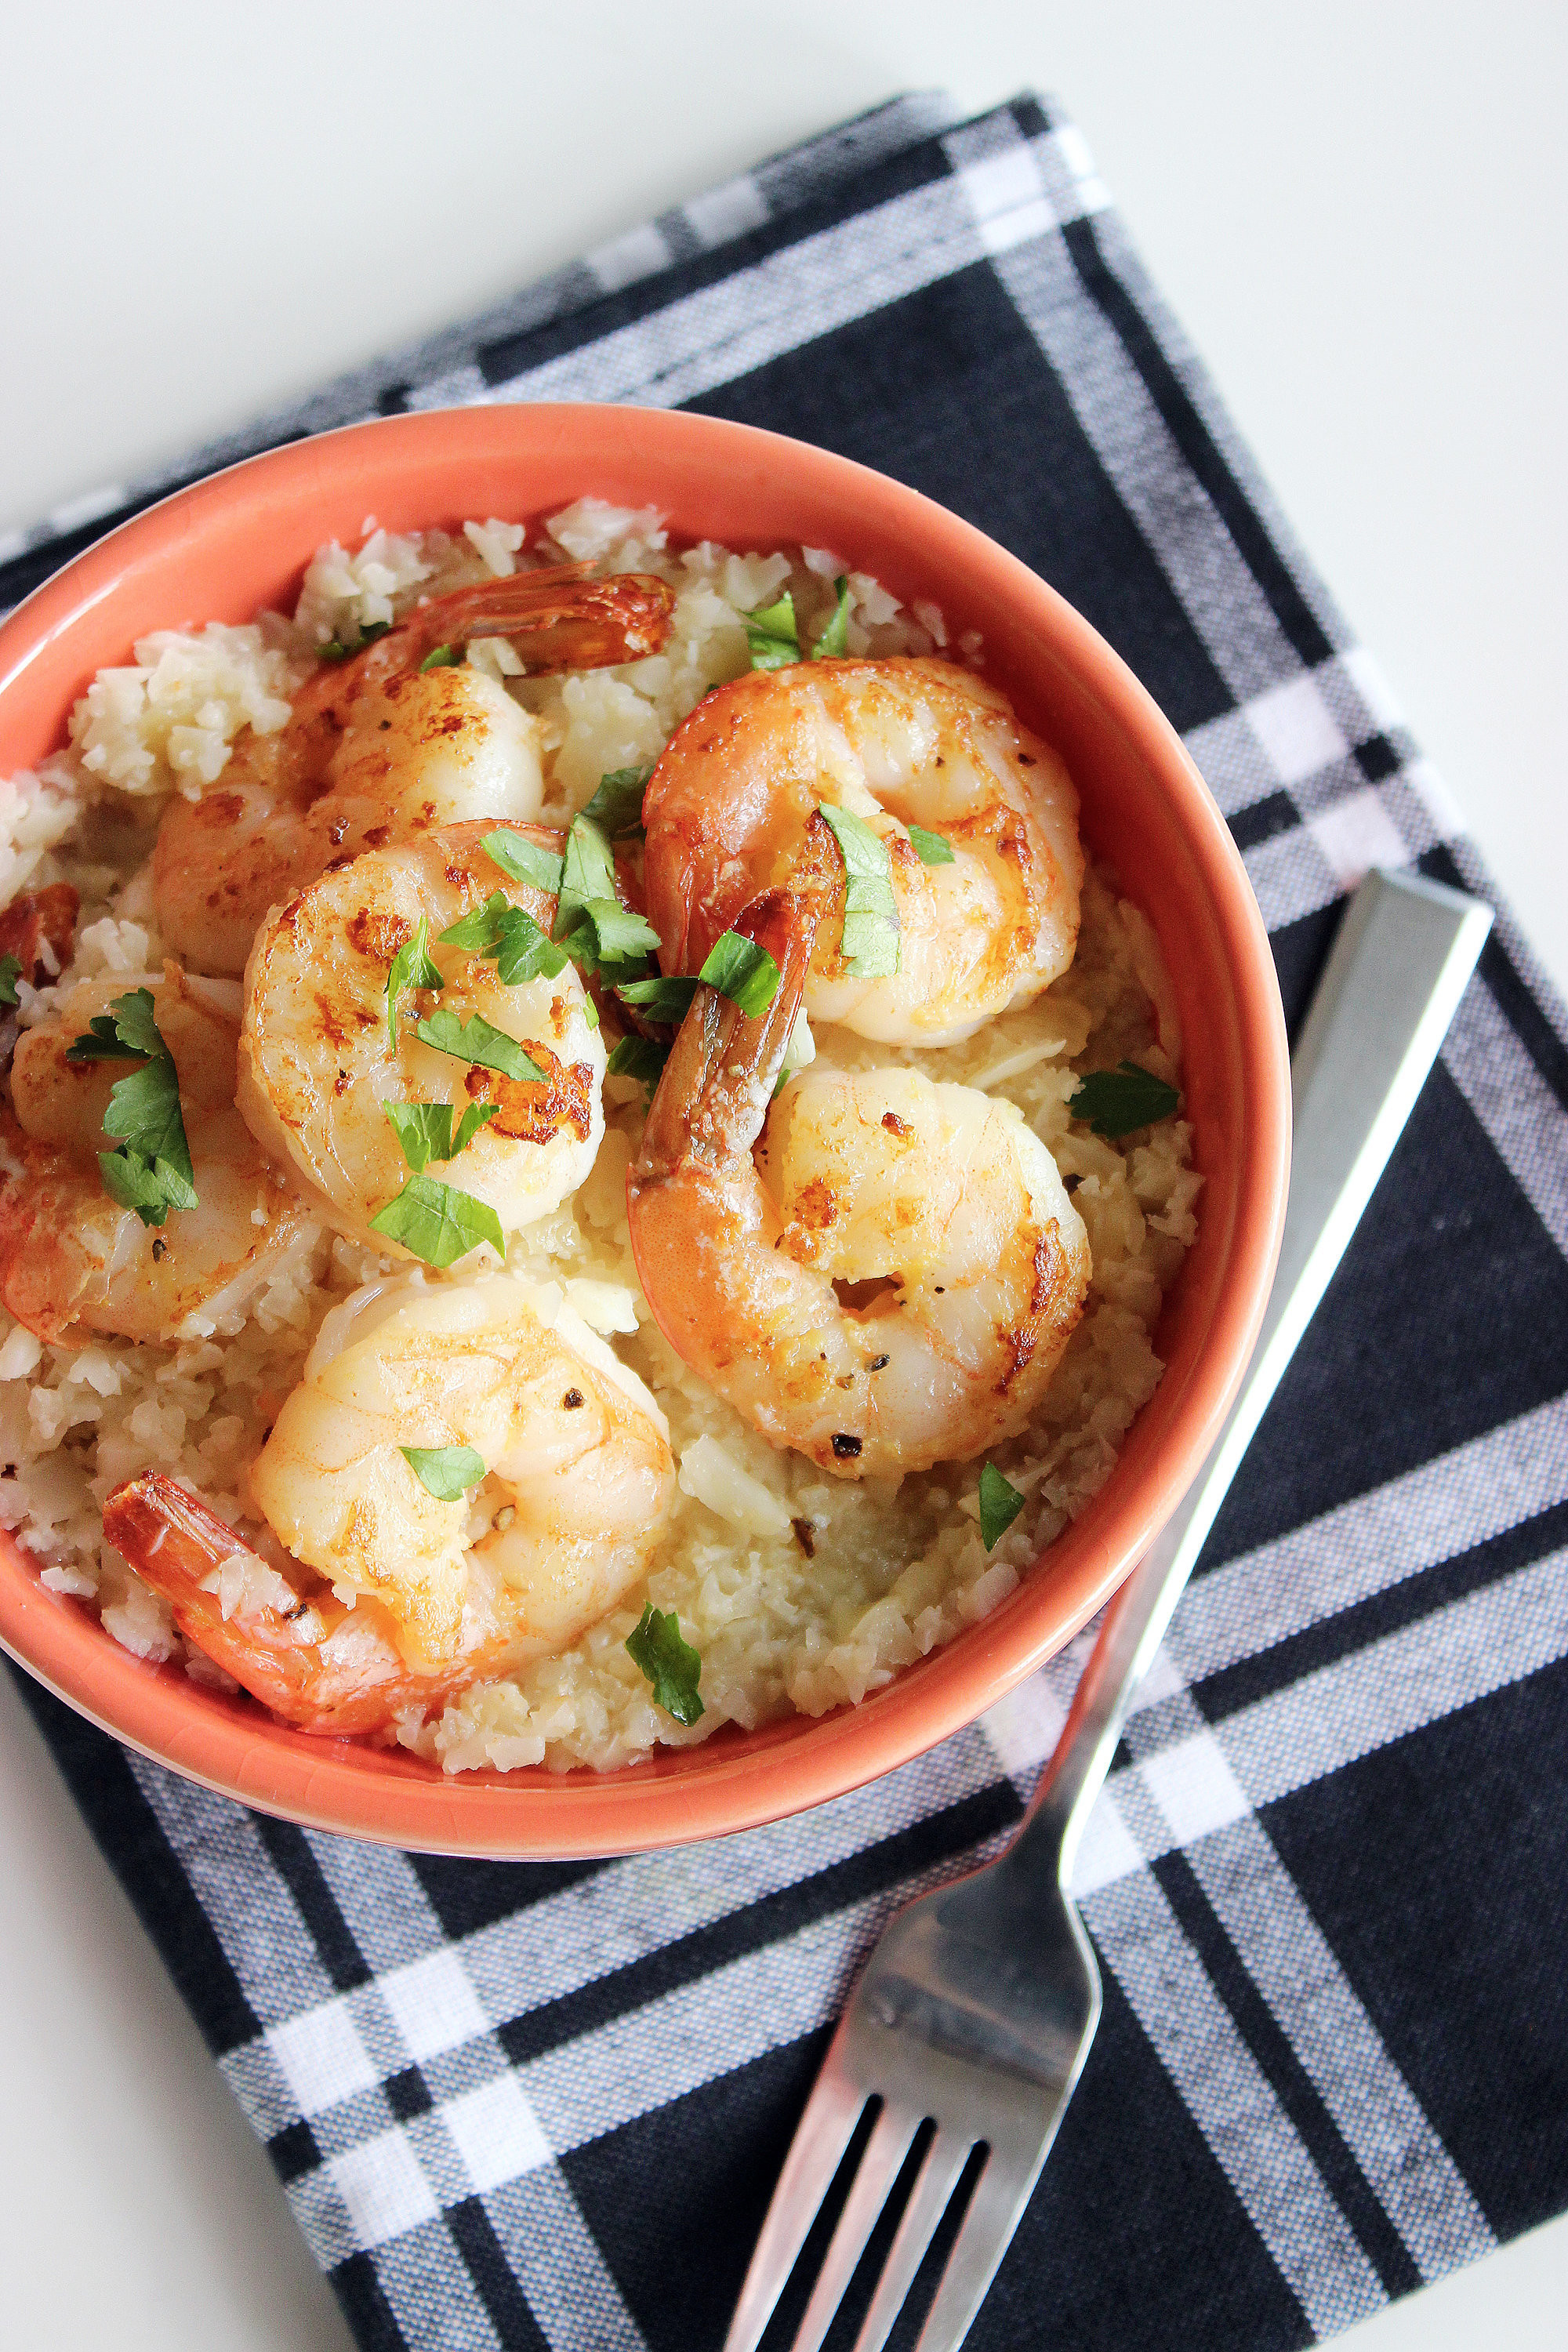 Shrimp and Grits Healthy the 20 Best Ideas for Healthy Shrimp and Grits